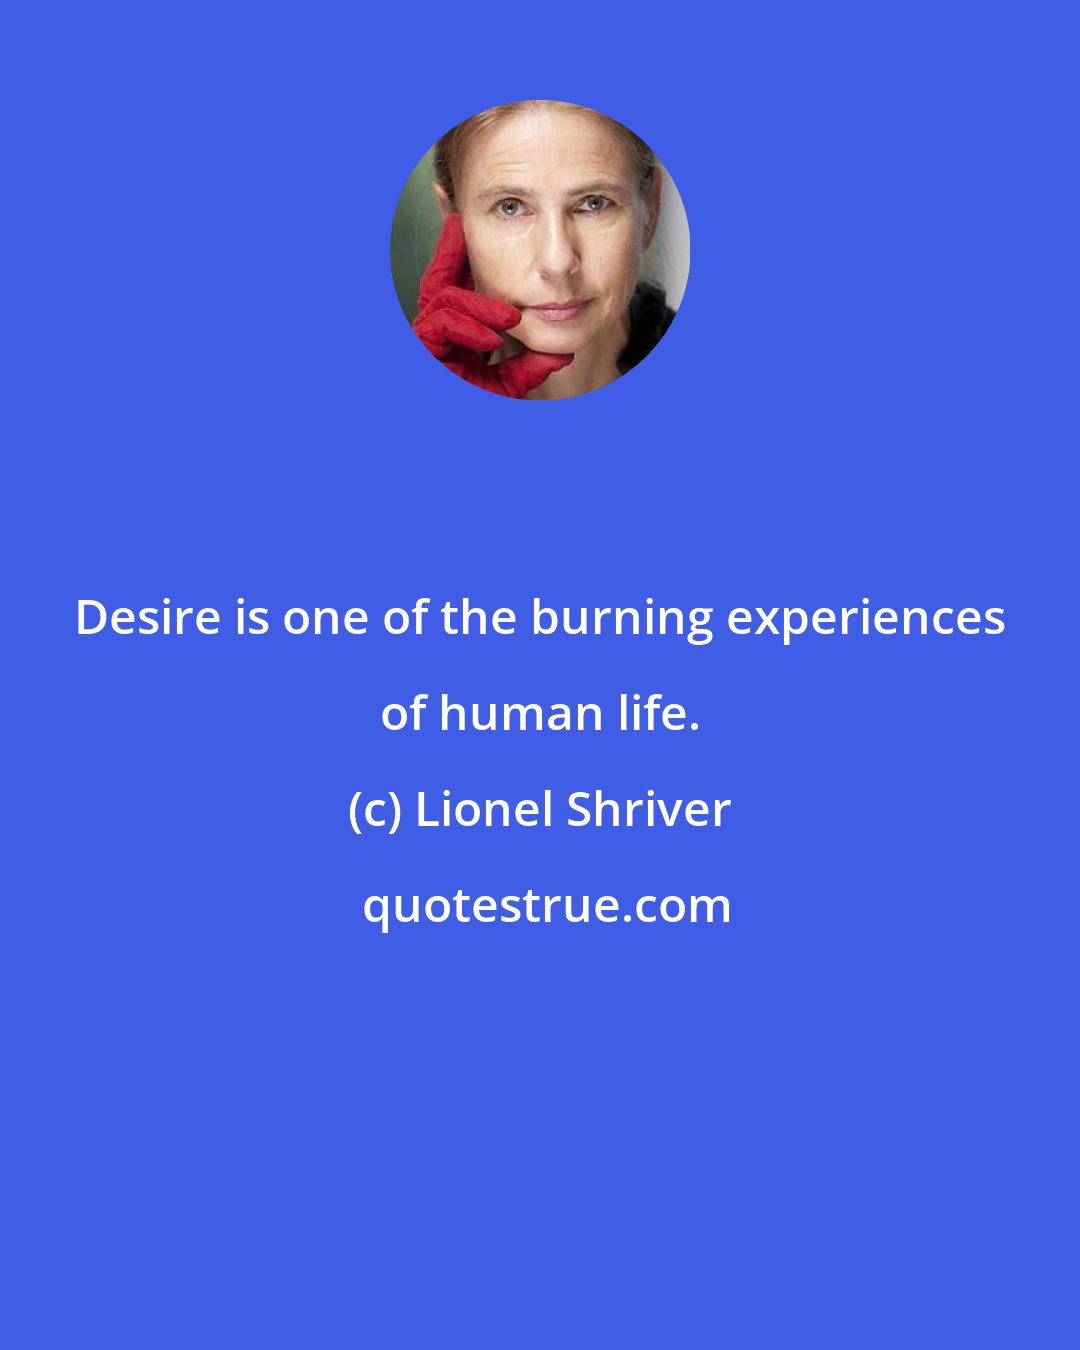 Lionel Shriver: Desire is one of the burning experiences of human life.